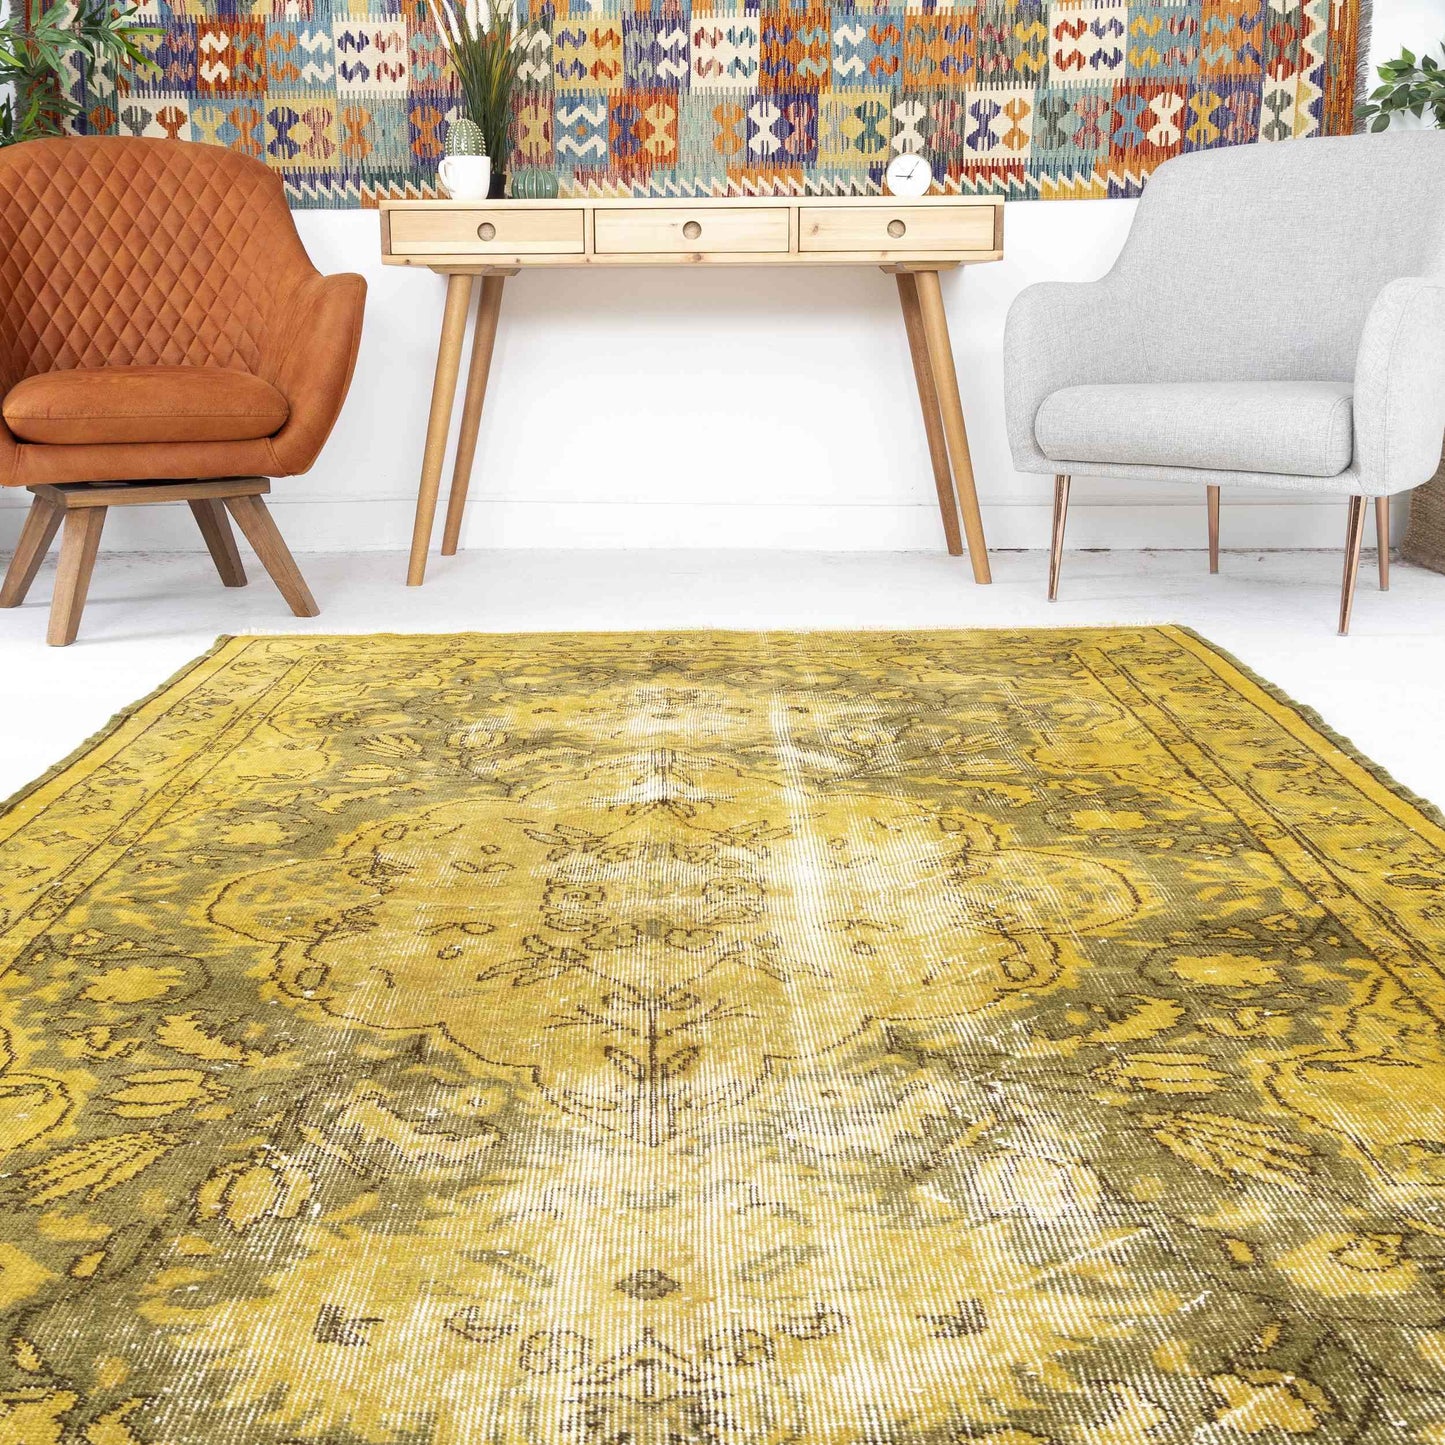 Oriental Rug Vintage Hand Knotted Wool On Cotton 169 x 266 Cm - 5' 7'' x 8' 9'' Yellow C006 ER12